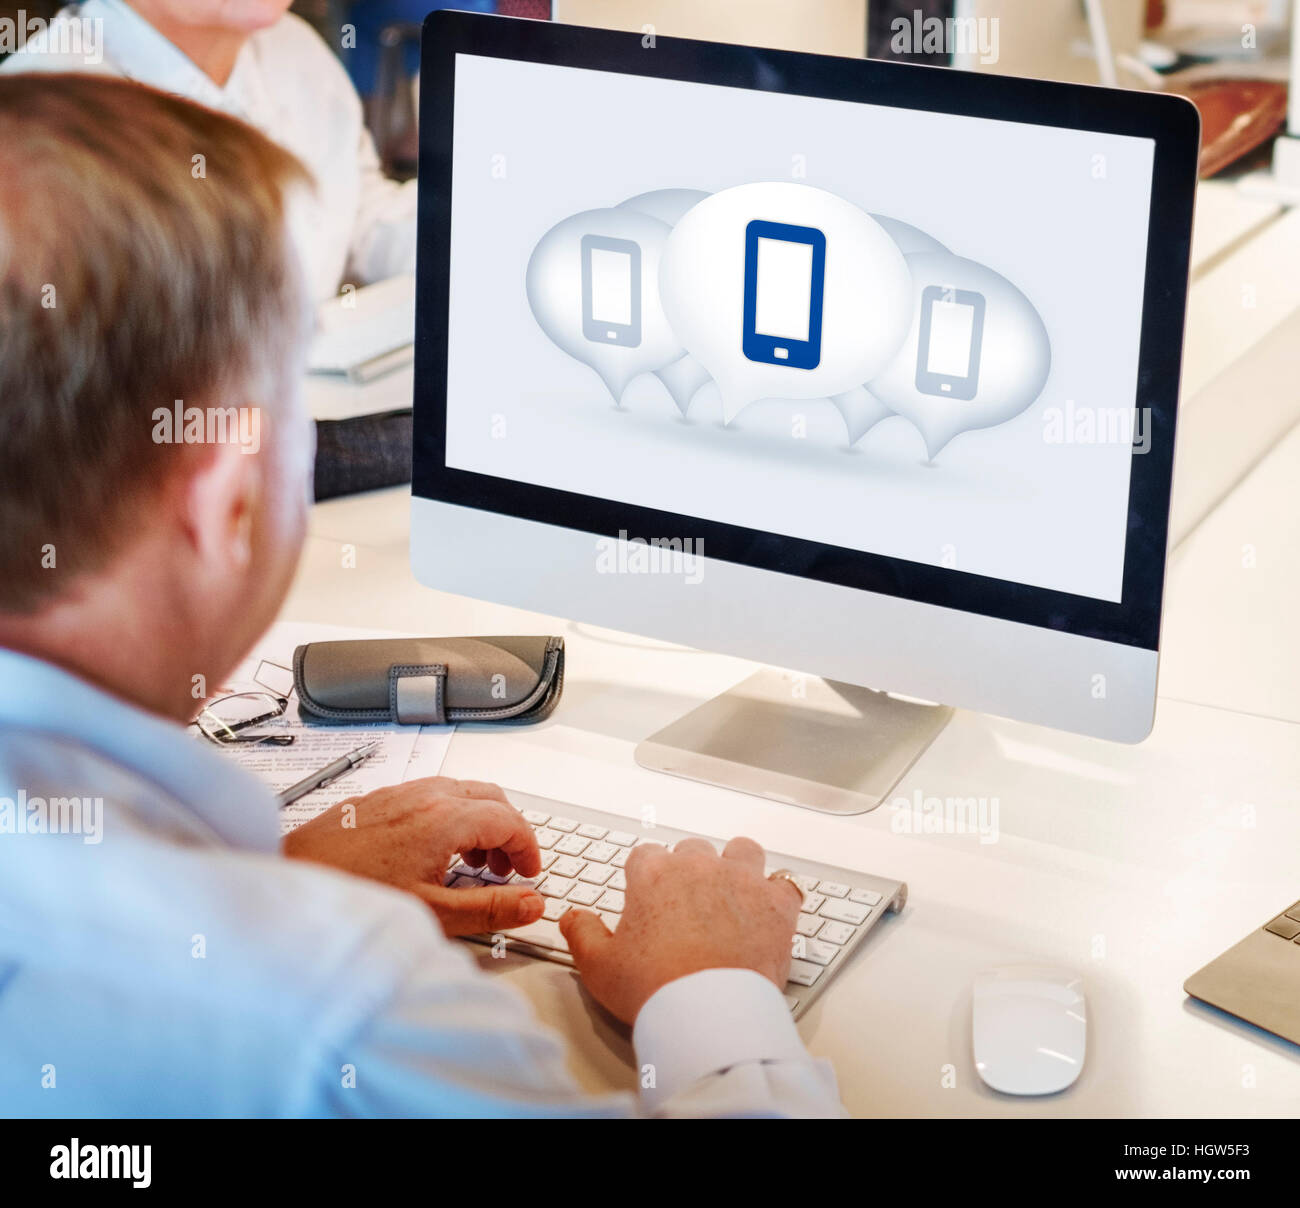 Smart Phone Mobile Internet Networking Talk Concept Stock Photo